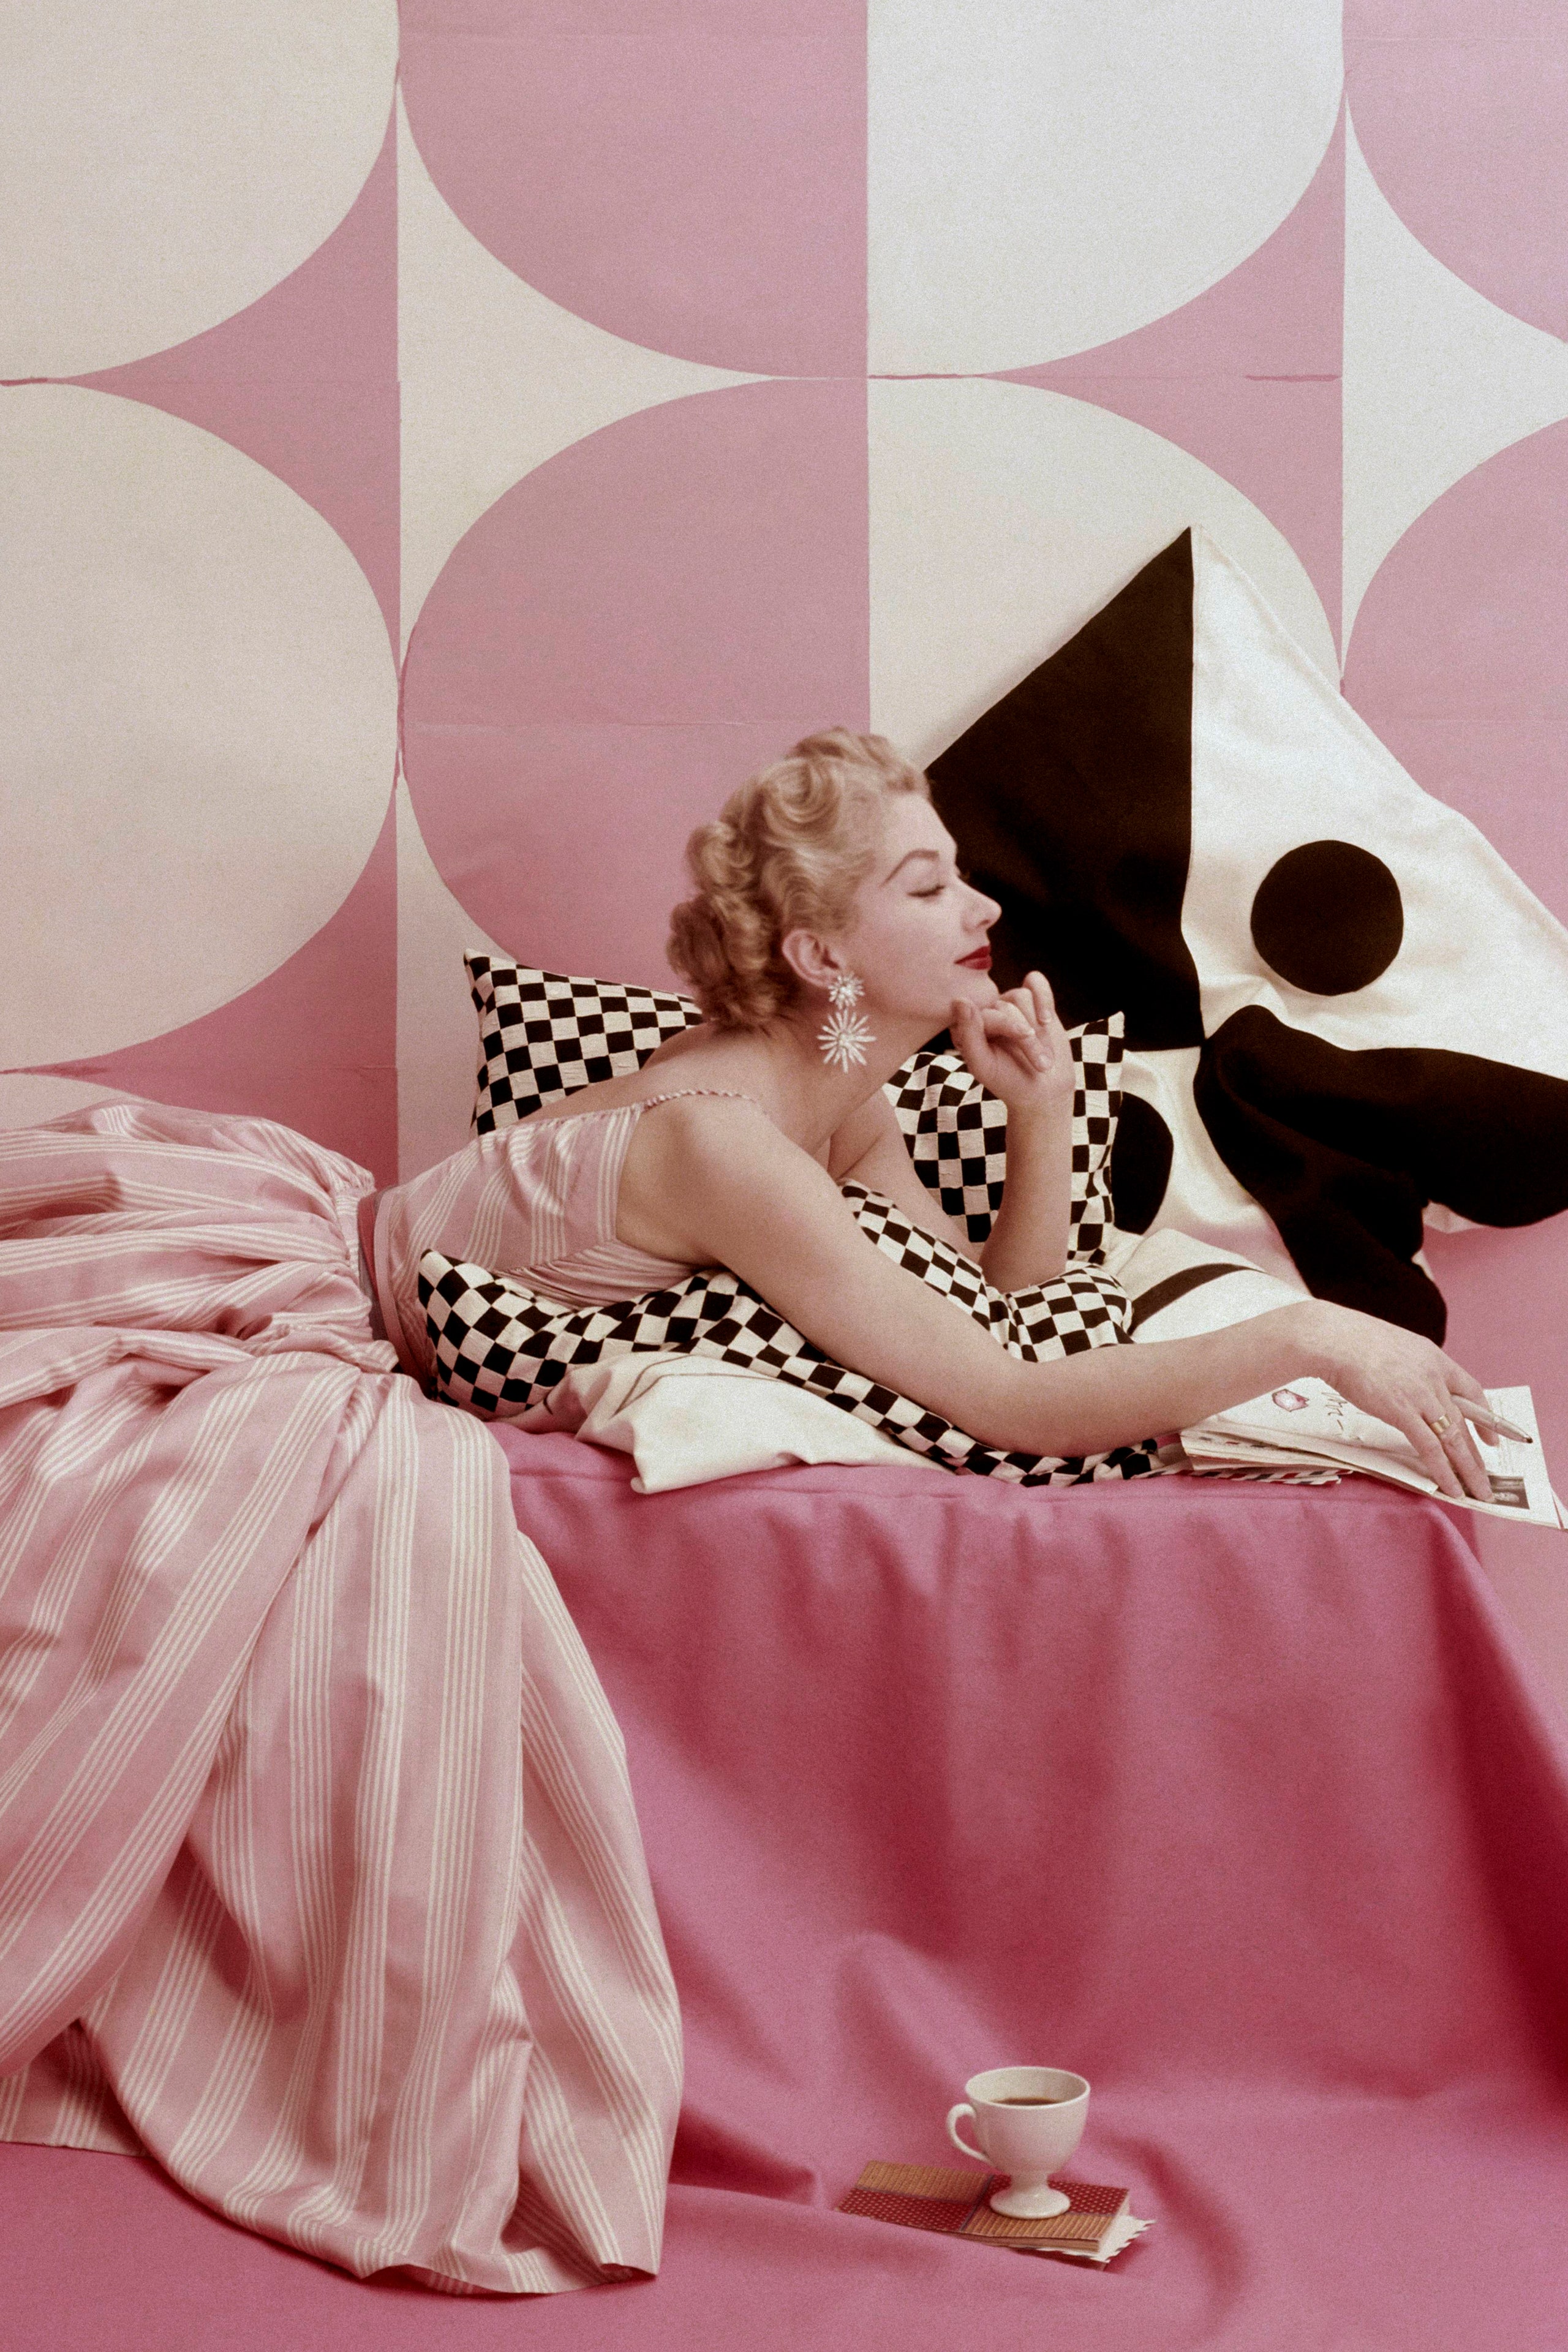 Model Lisa Fonssagrives lounging on bed wearing Claire McCardell's pink and white striped dress.